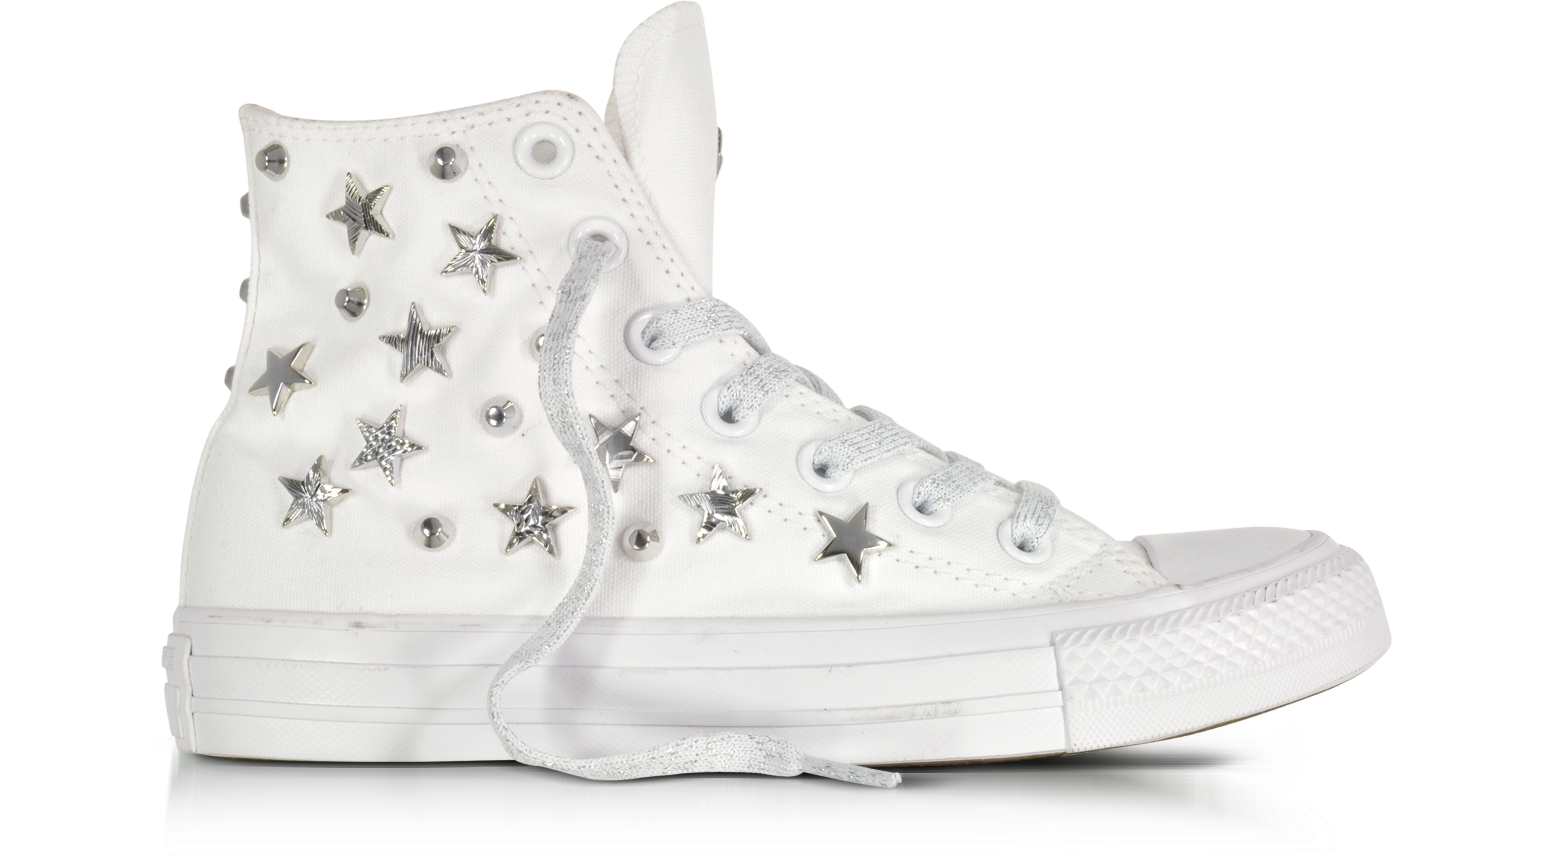 Converse Limited Edition Chuck Taylor All Star Hi White Sneakers w/Stars  and Studs 5.5 UK at FORZIERI